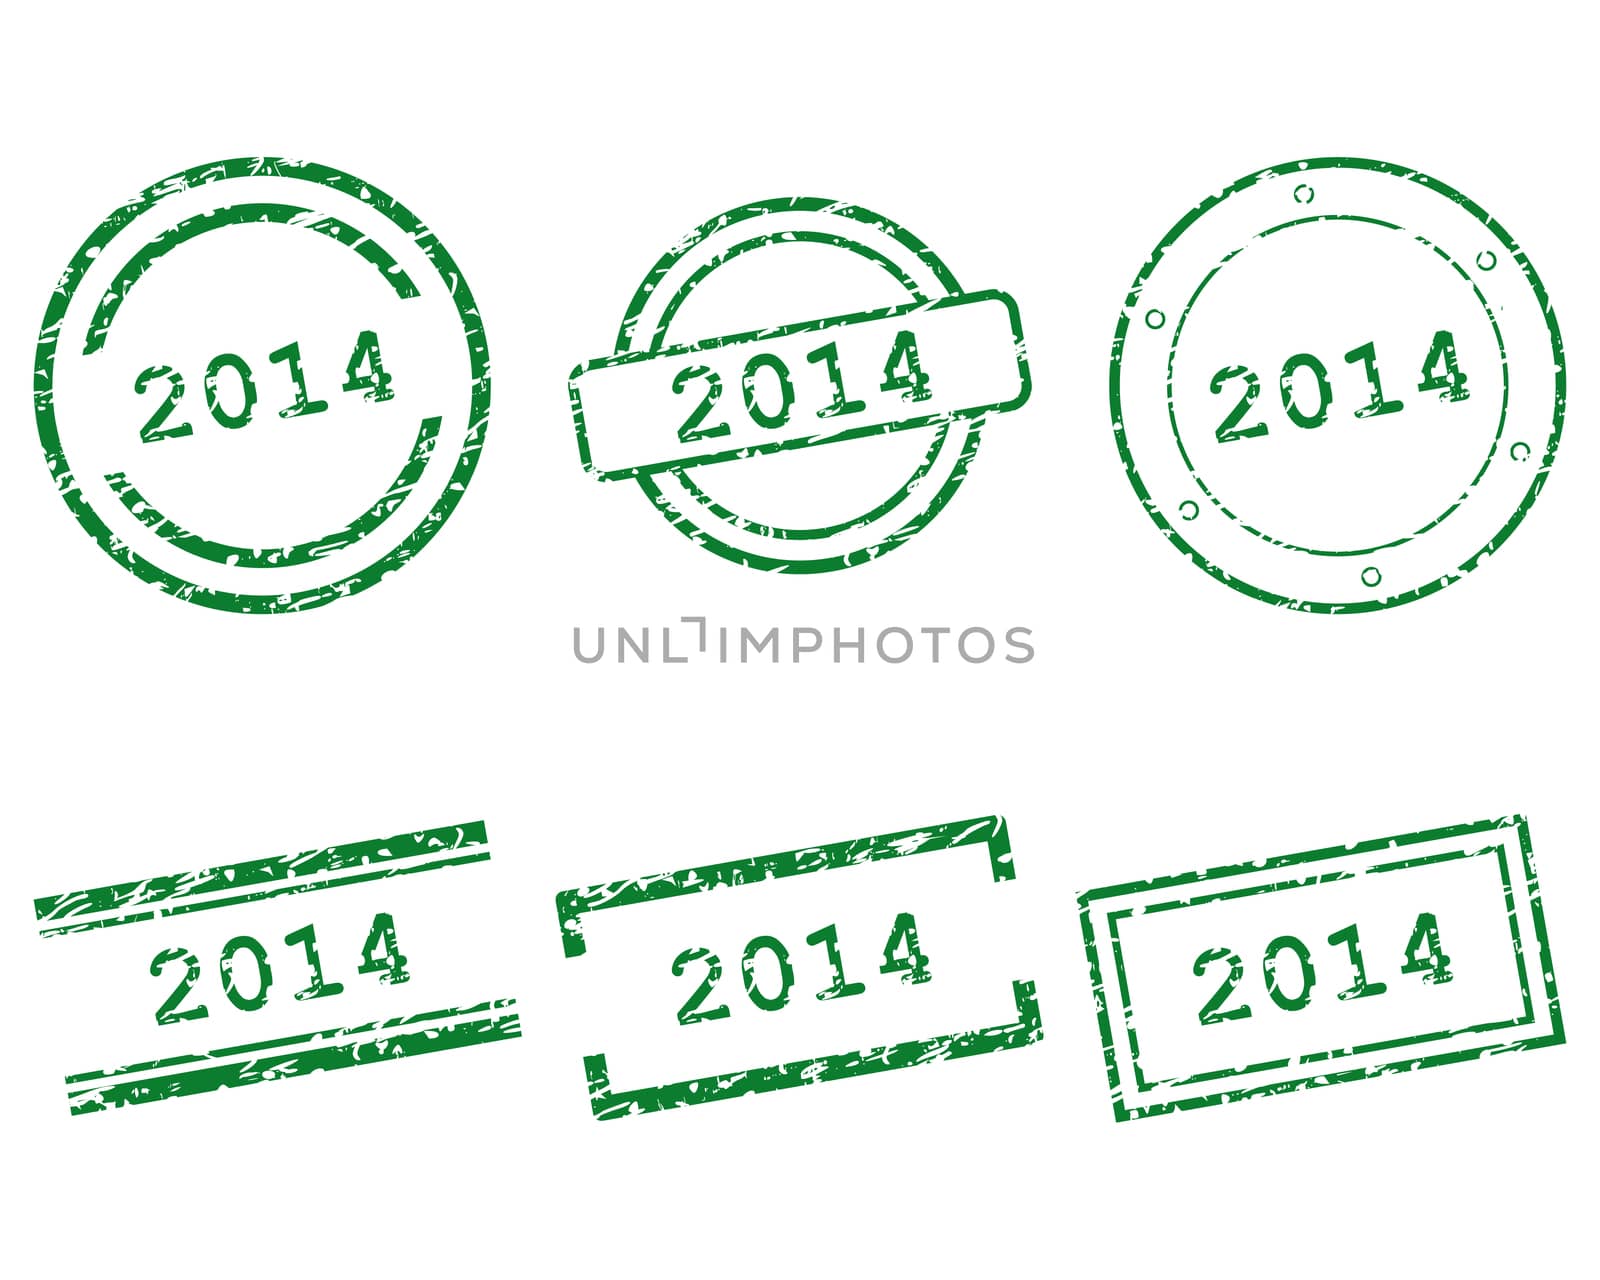 2014 stamps by rbiedermann